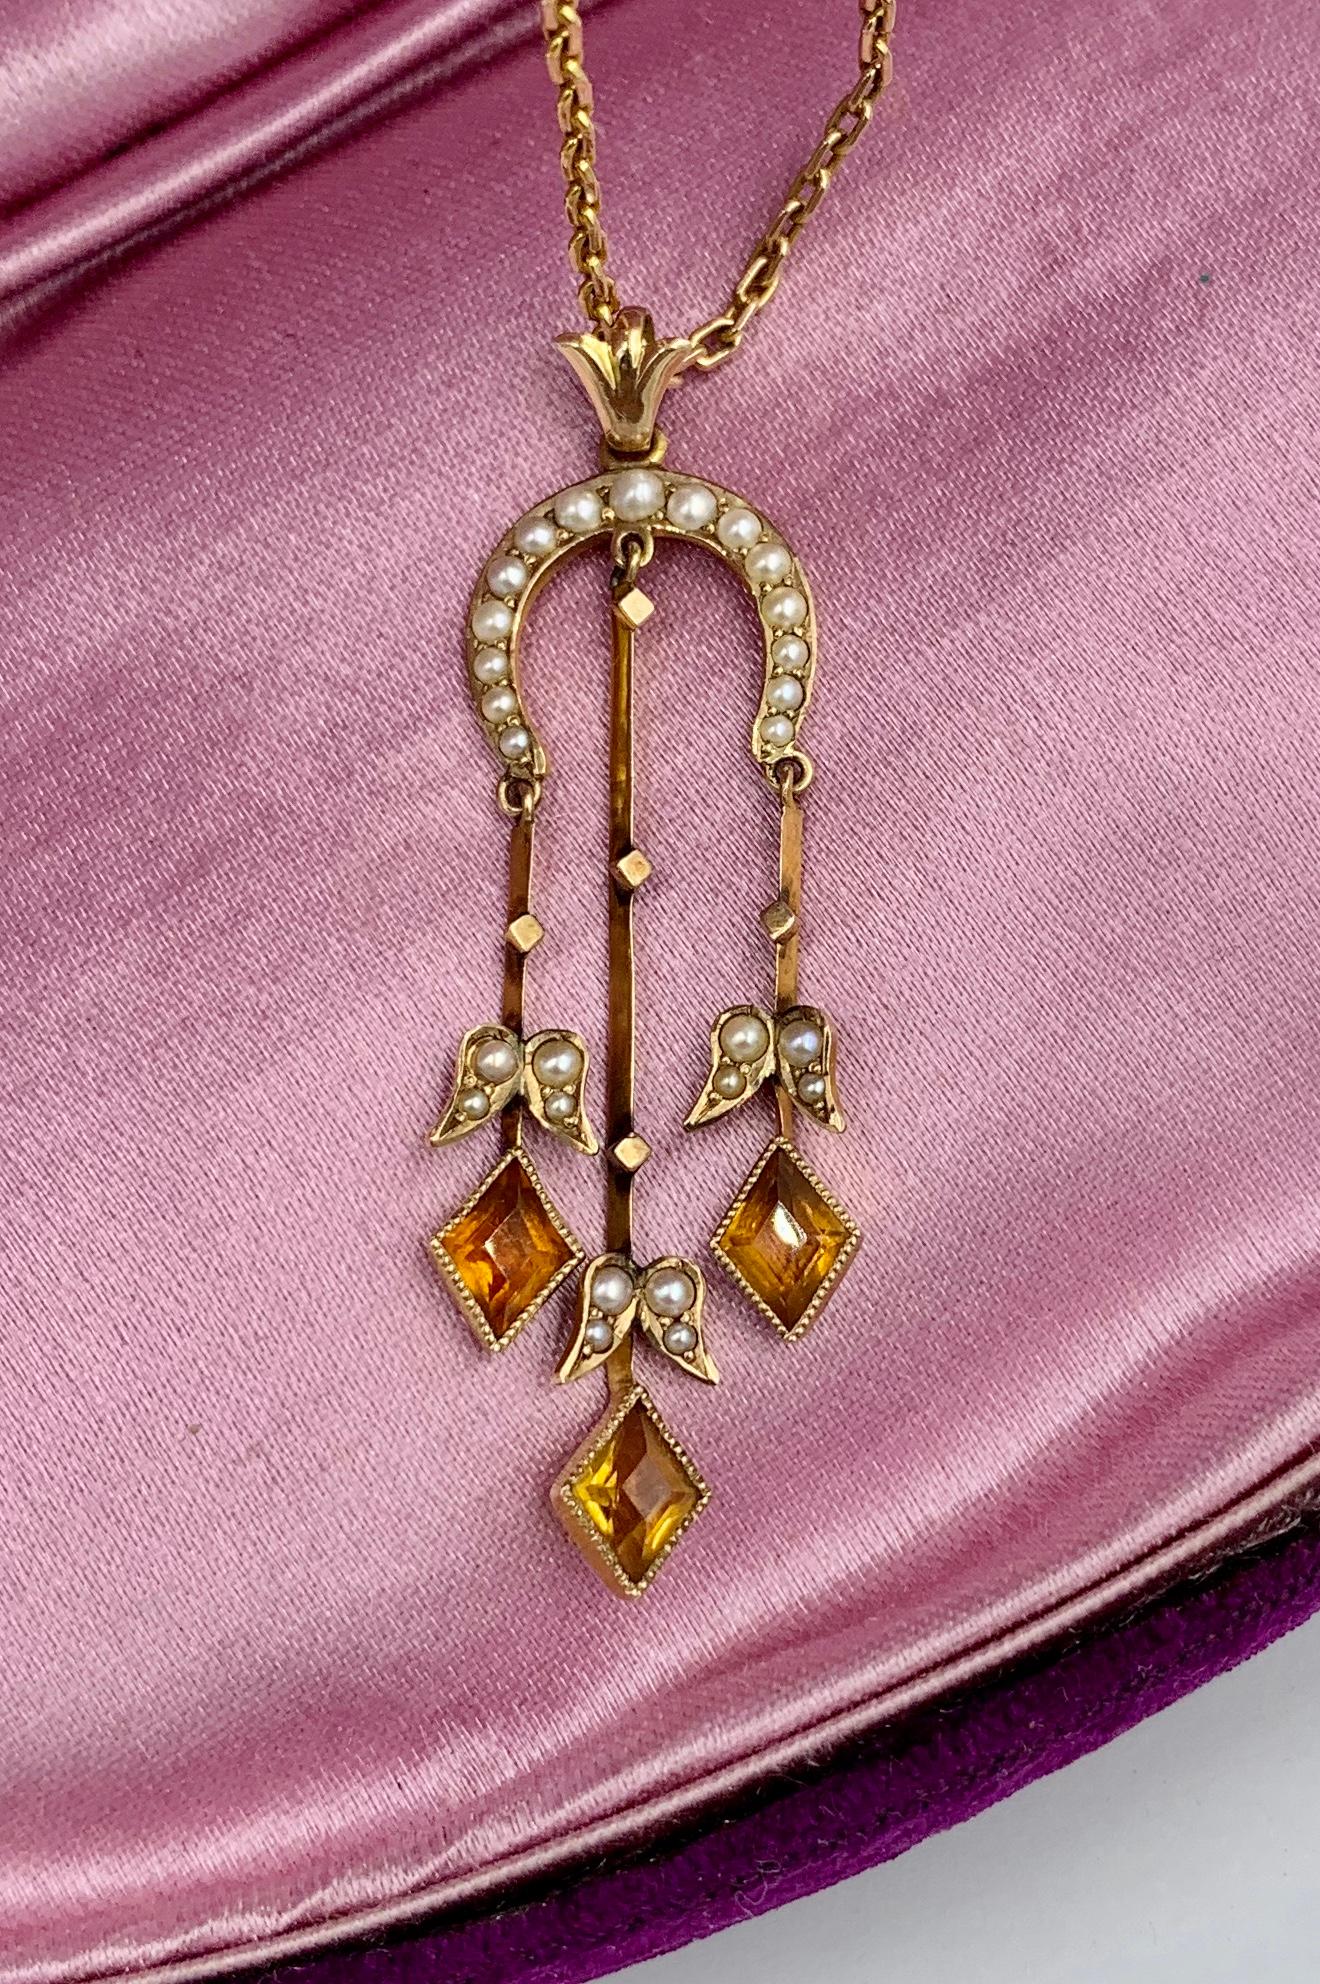 A beautiful early 20th Century Citrine Pearl Pendant Necklace in 10 Karat Yellow Gold with a beautiful 10 Karat Gold Chain.  The jewel is just stunning and bears the maker's mark for the esteemed Fisher Co, Garland, of Newark, New Jersey.  The rare